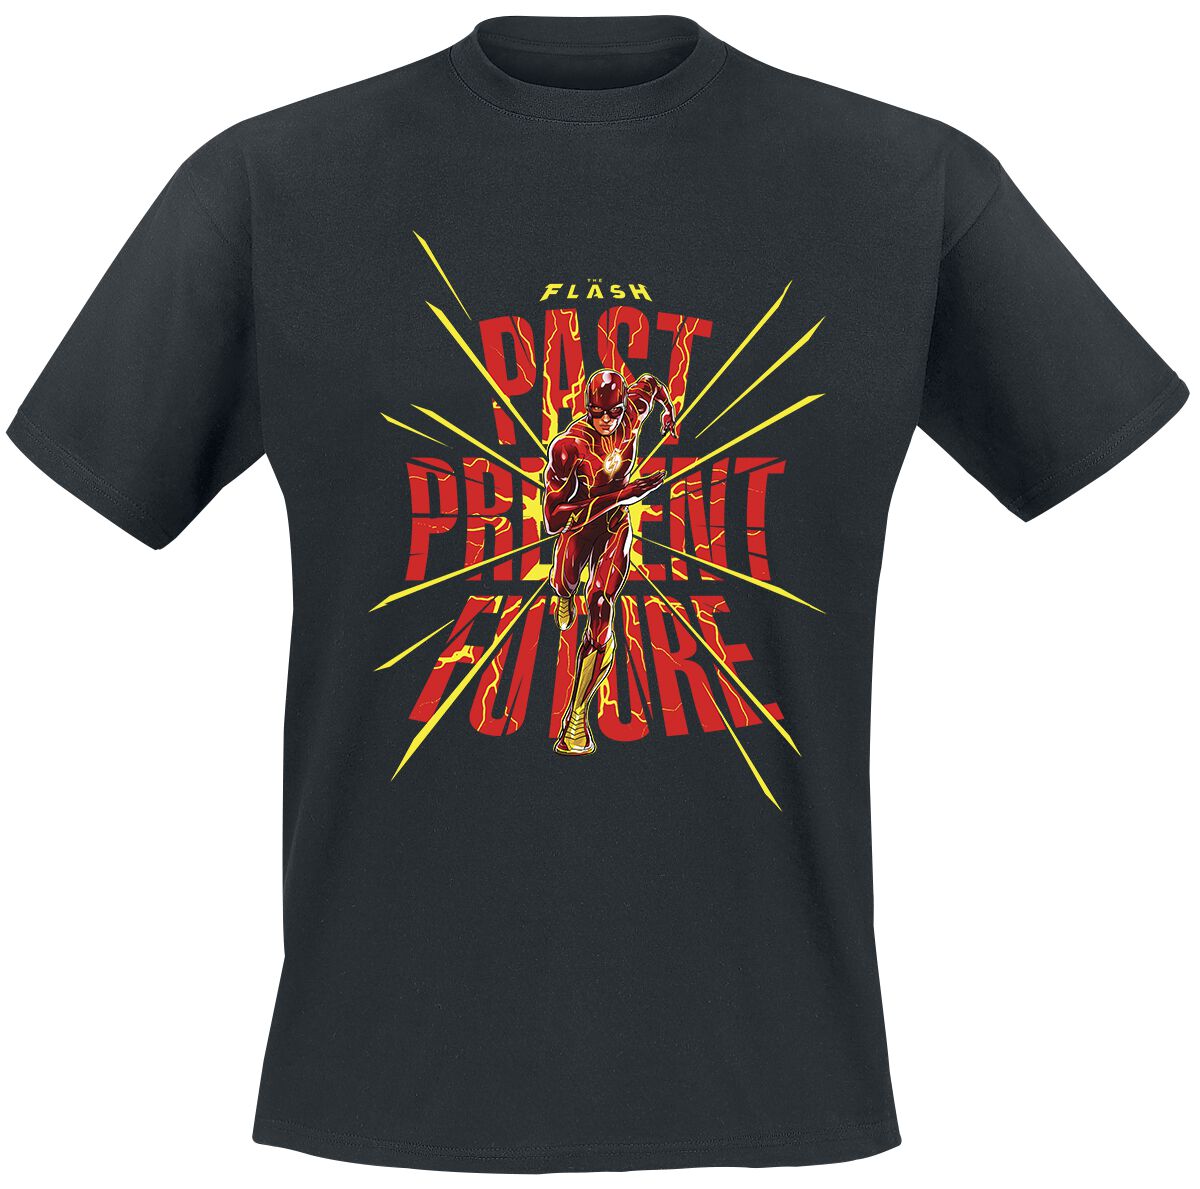 The Flash Past Present Future T-Shirt schwarz in S